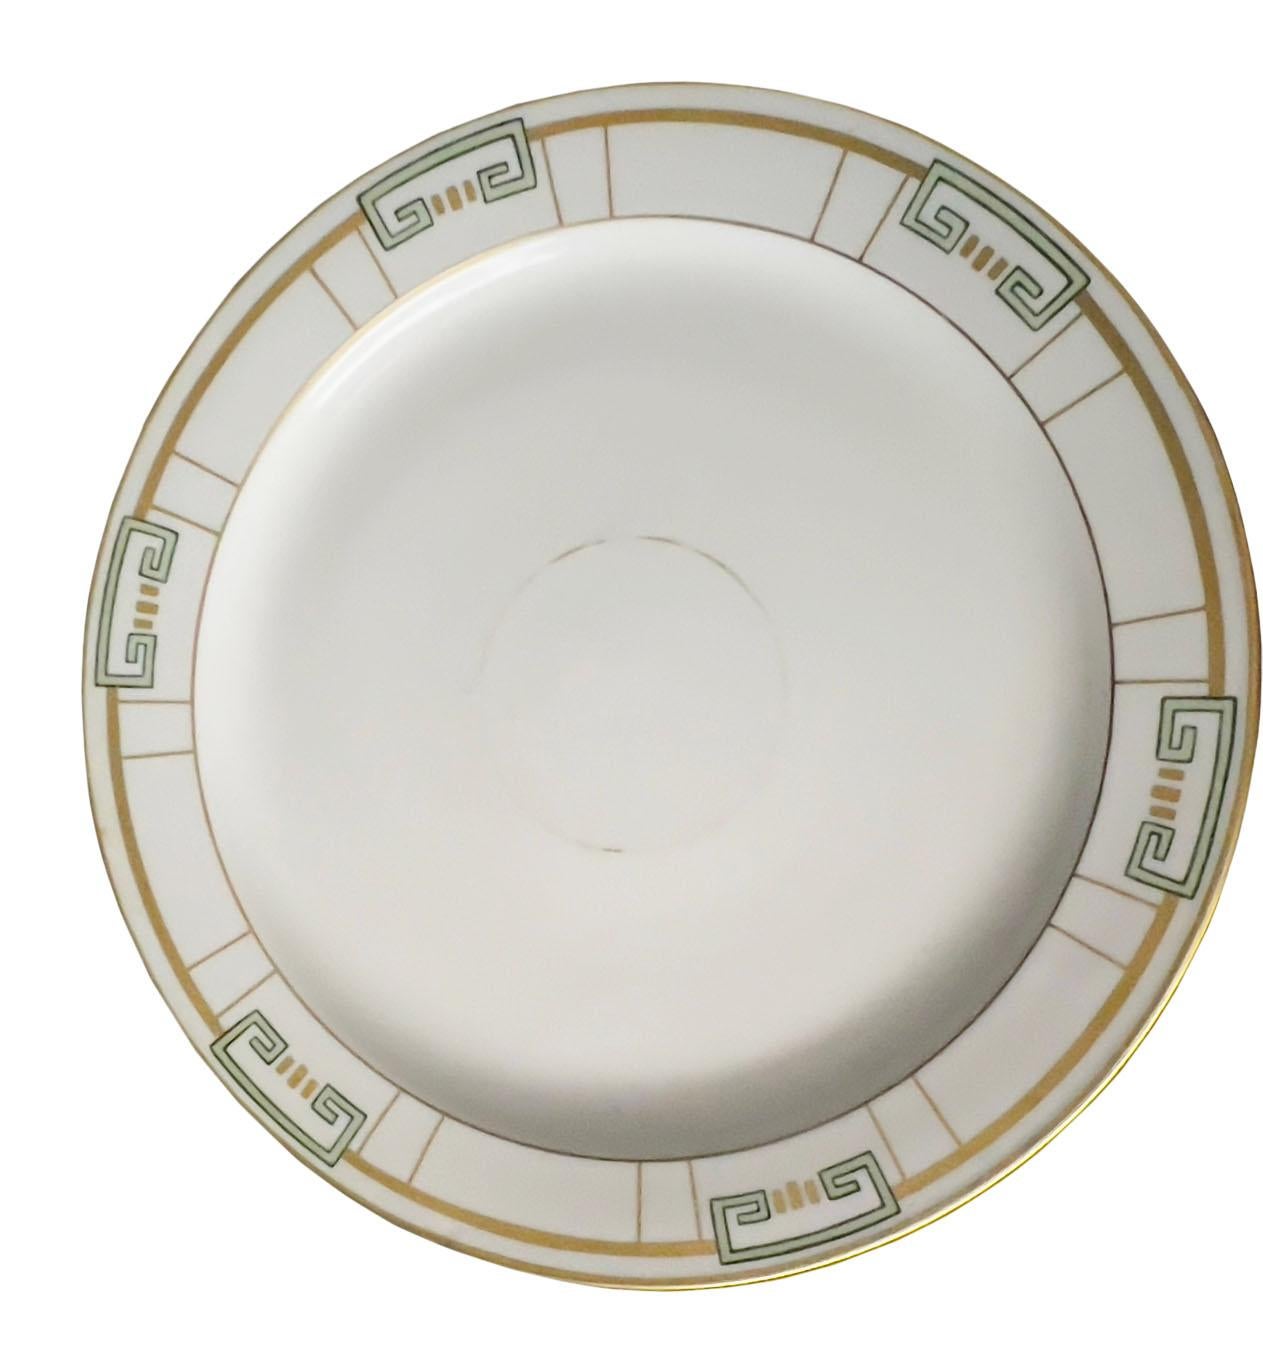 A large round art deco design platter with a geometric green and gold design. The platter is signed Haviland France, and the artist name S. Carpenter.. Perhaps a custom piece.